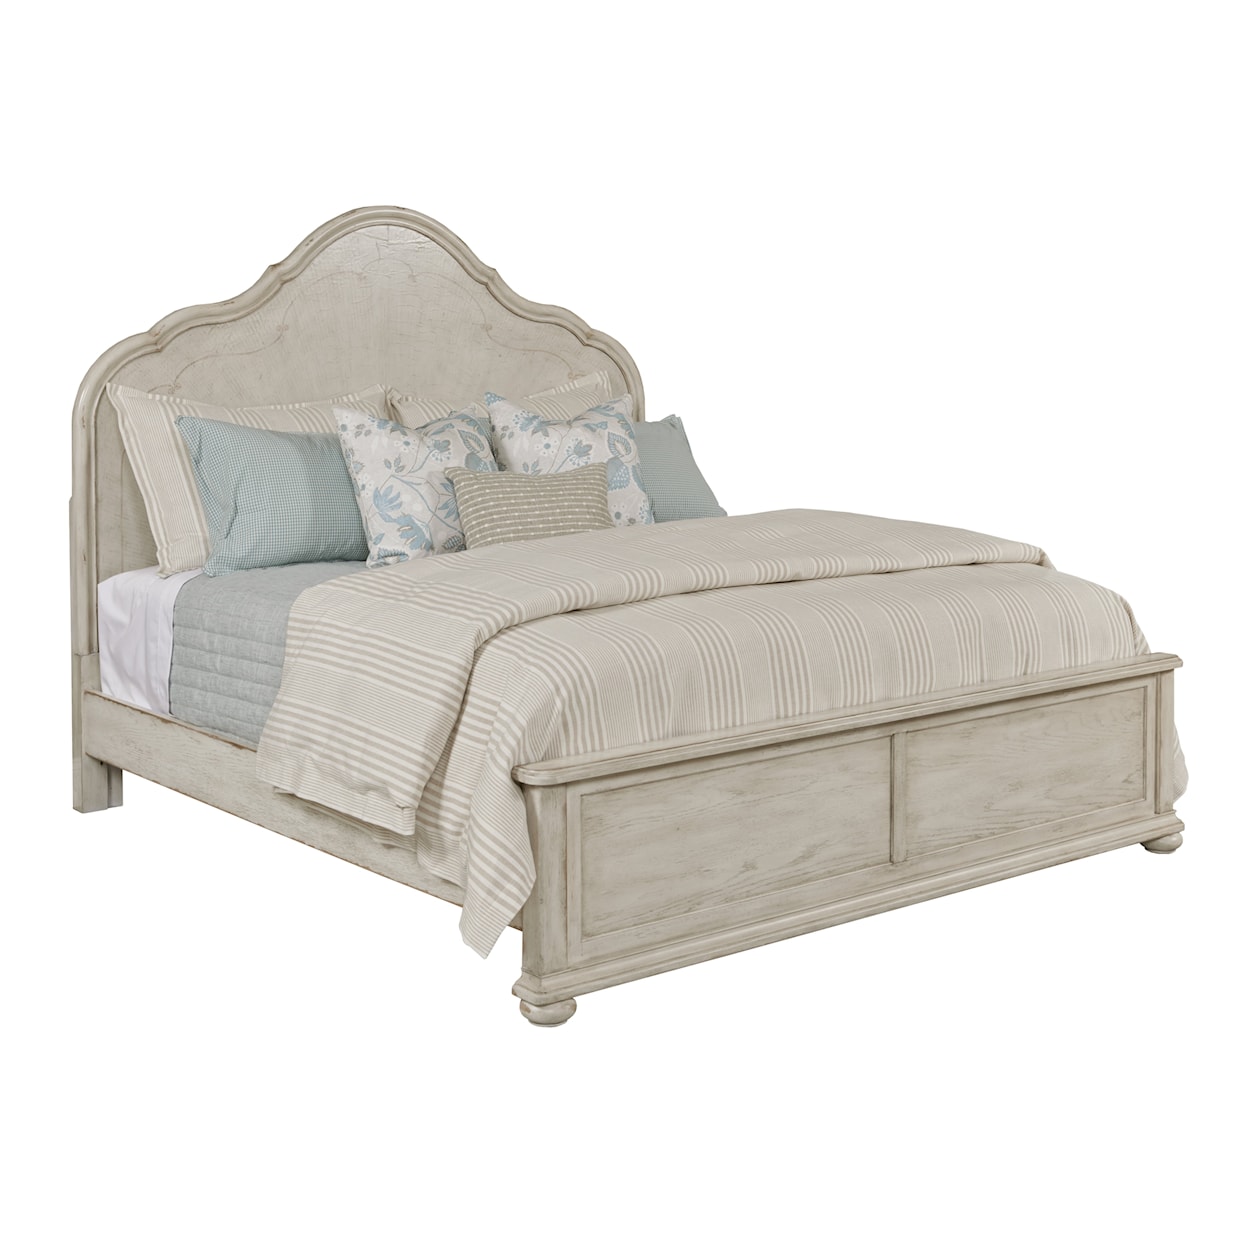 American Drew Cambric King Bed